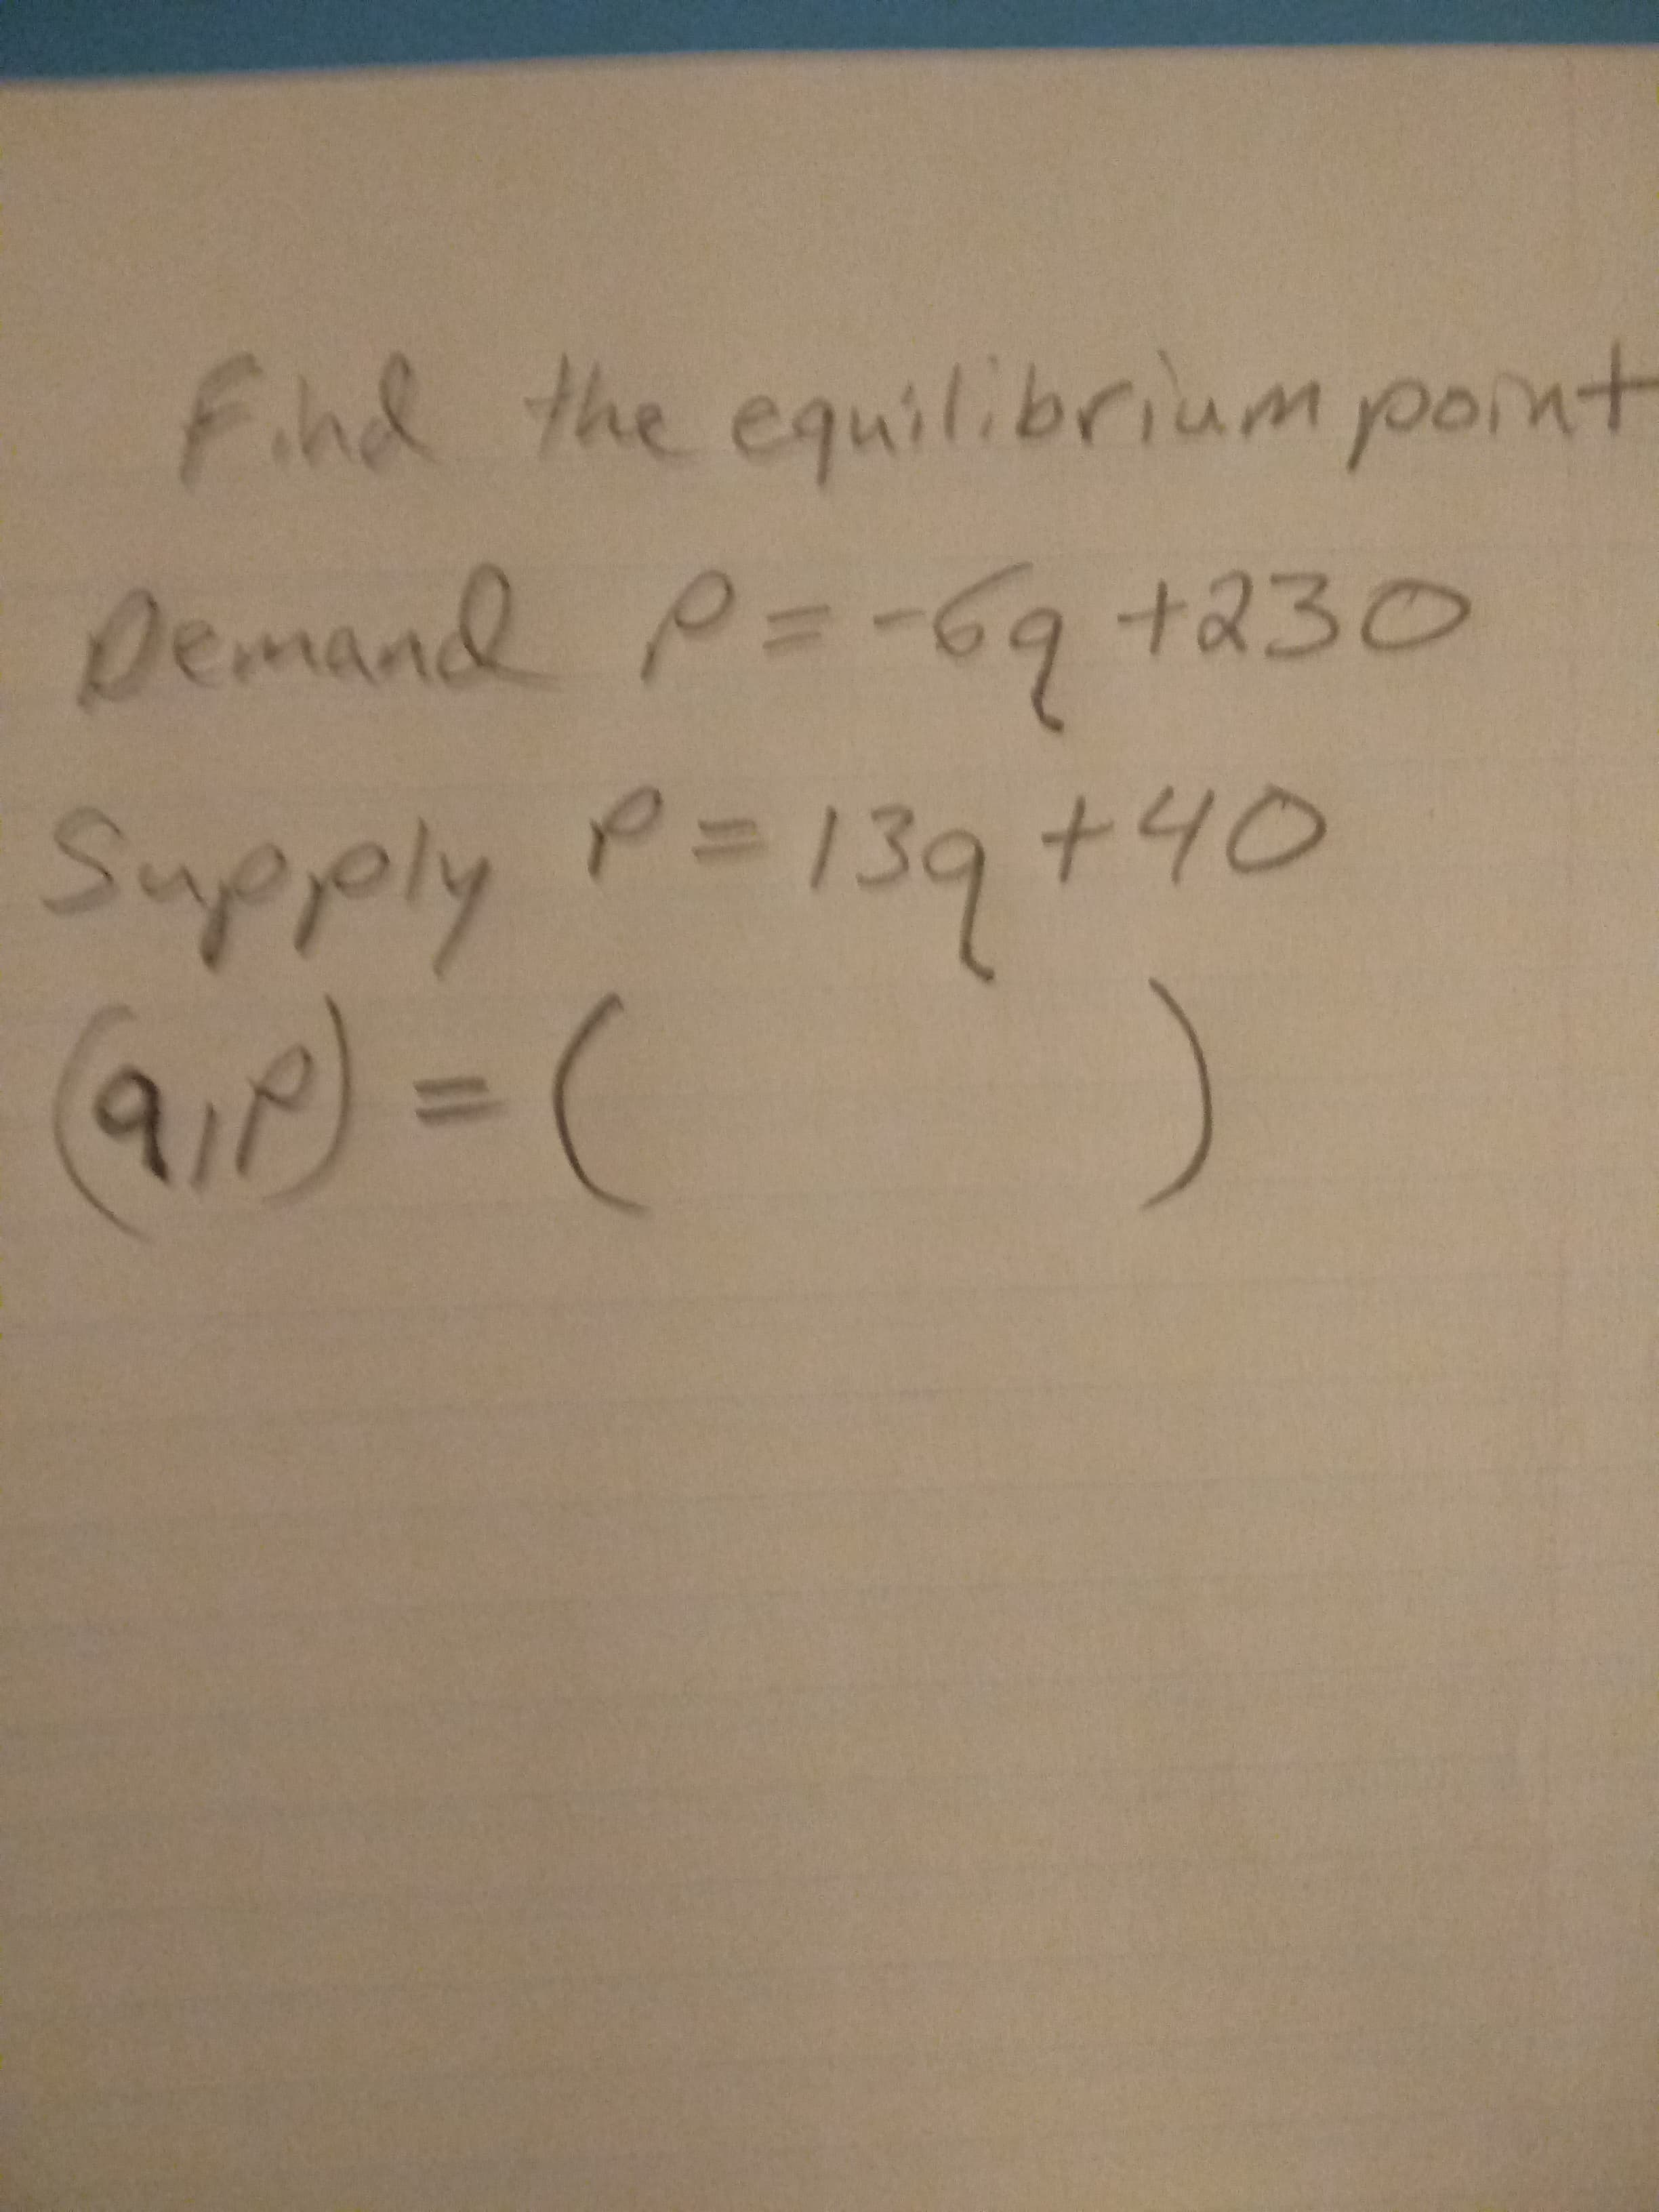 Find the equilibriumpoint
Demand P=-69 +230
Supply P=139+40
